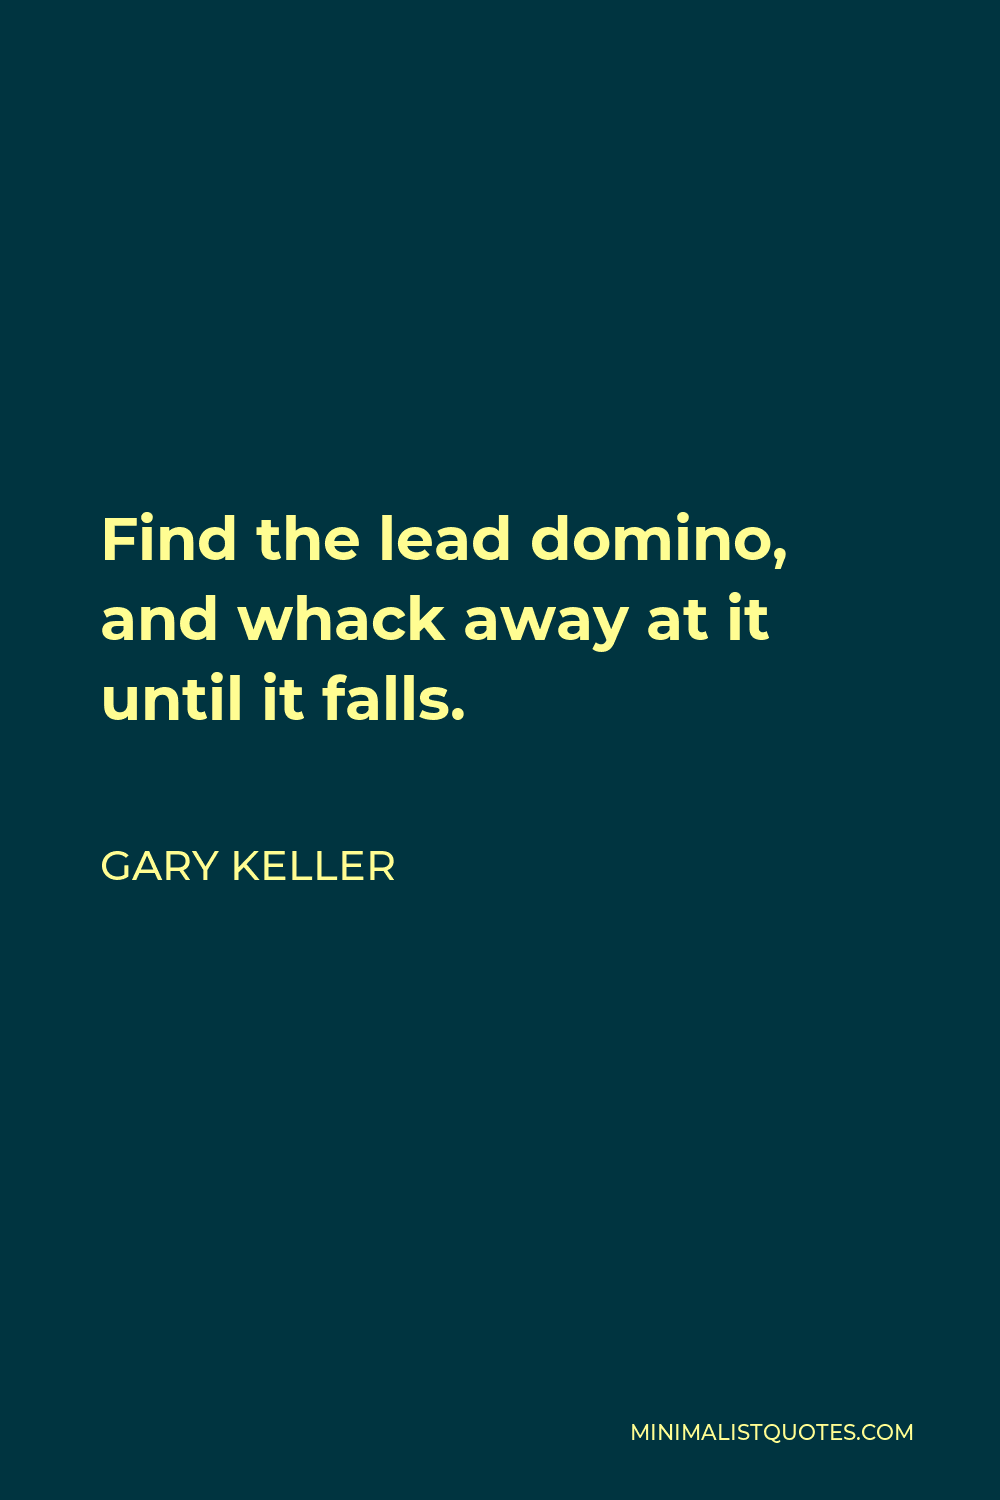 Gary Keller Quote - Find the lead domino, and whack away at it until it falls.